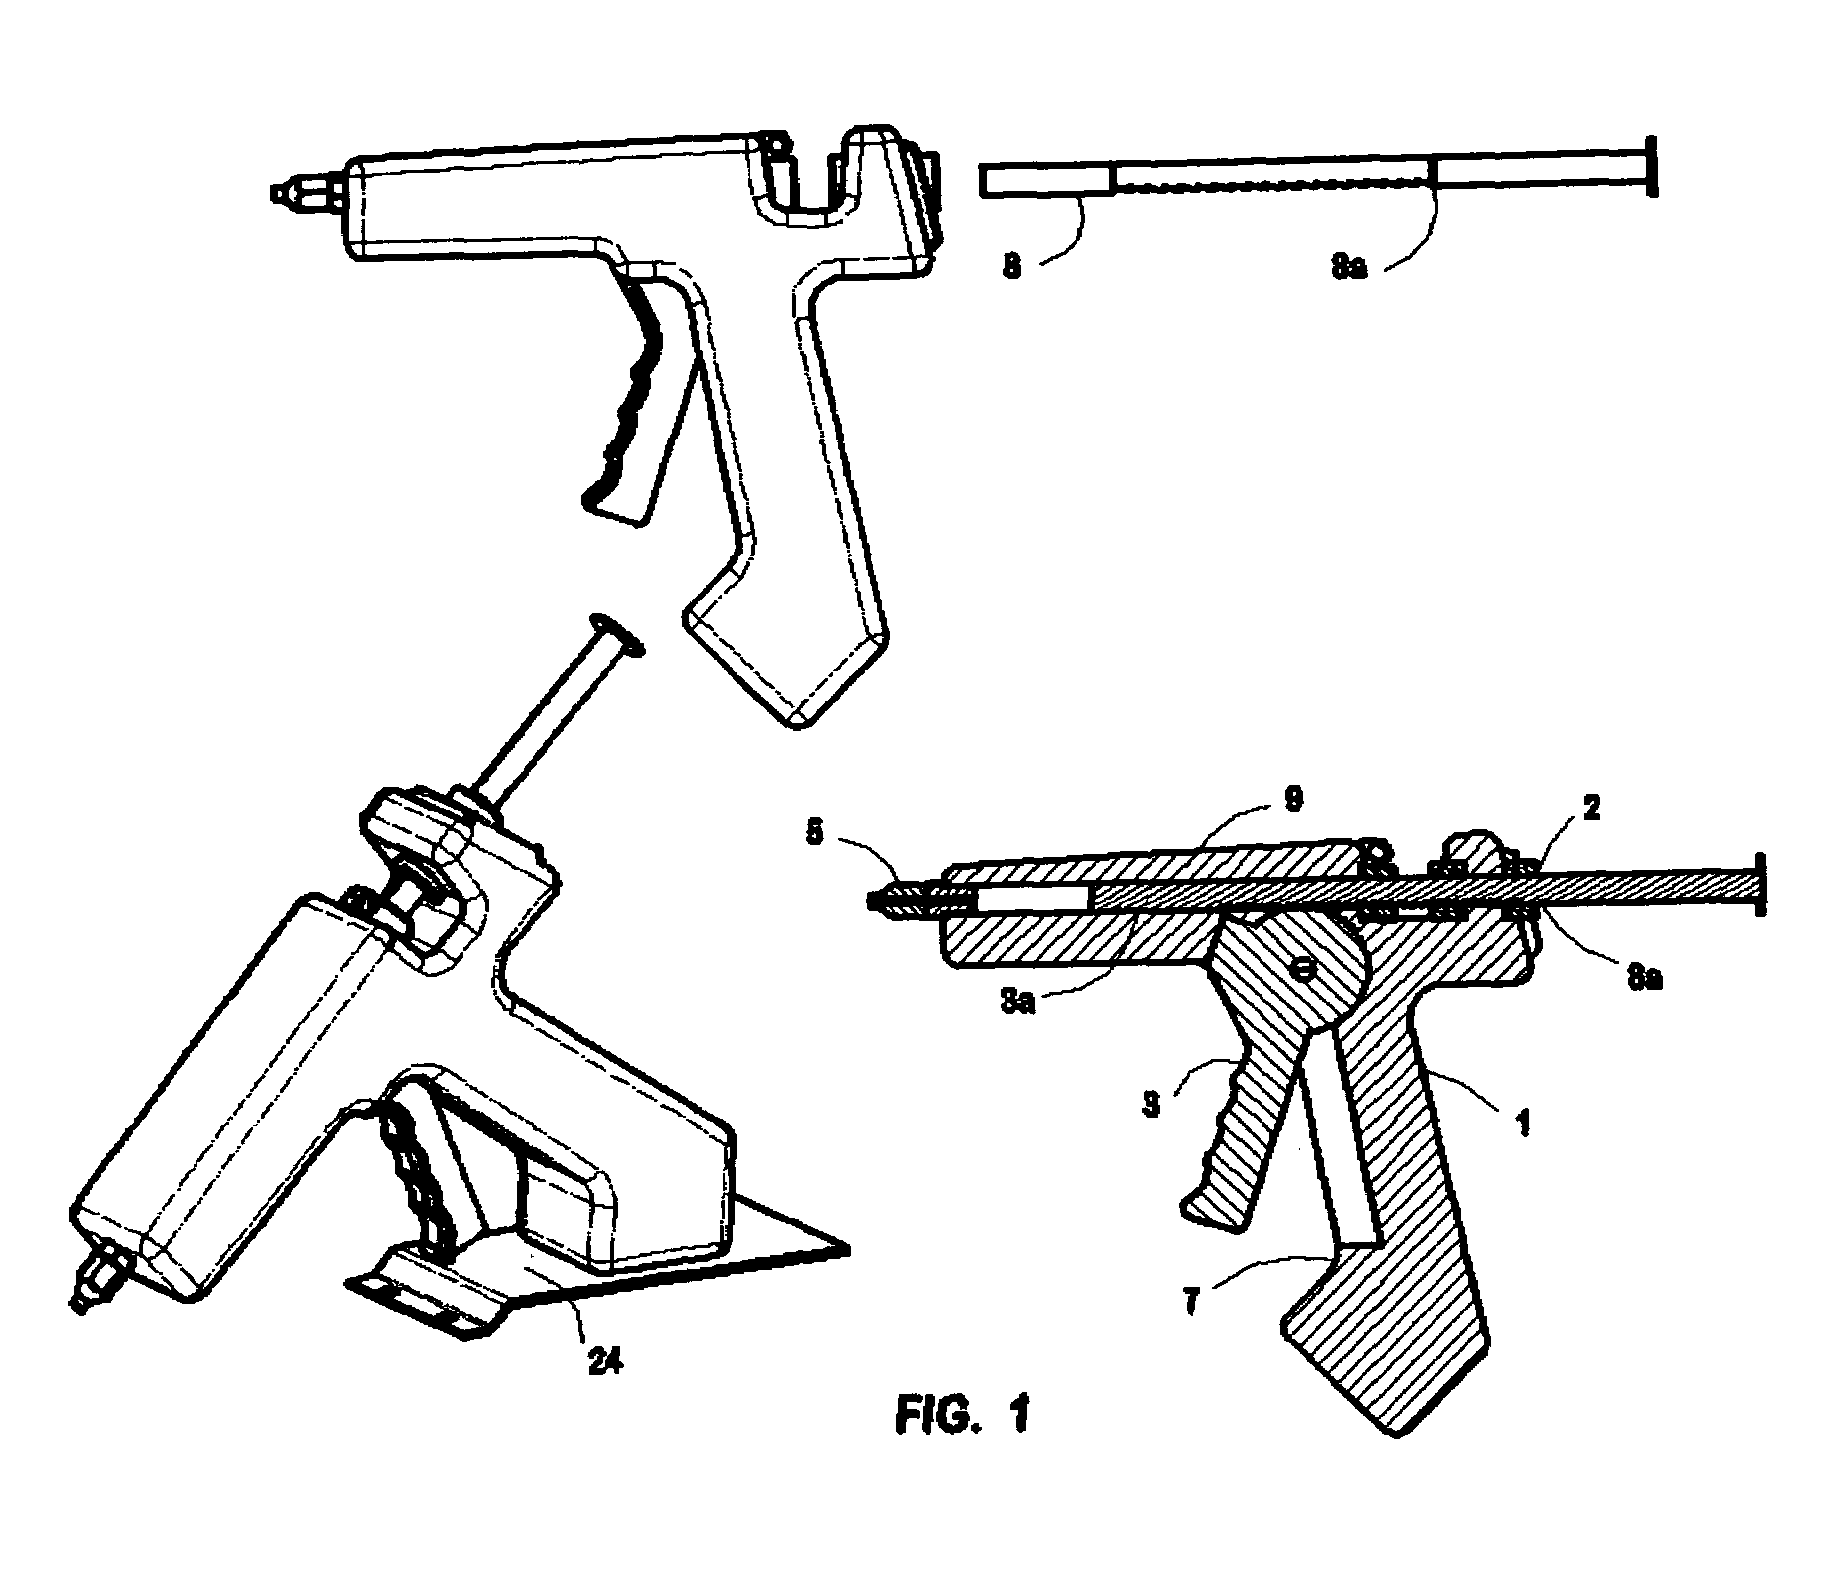 Apparatus, method, and kit for fabricating dental clasps